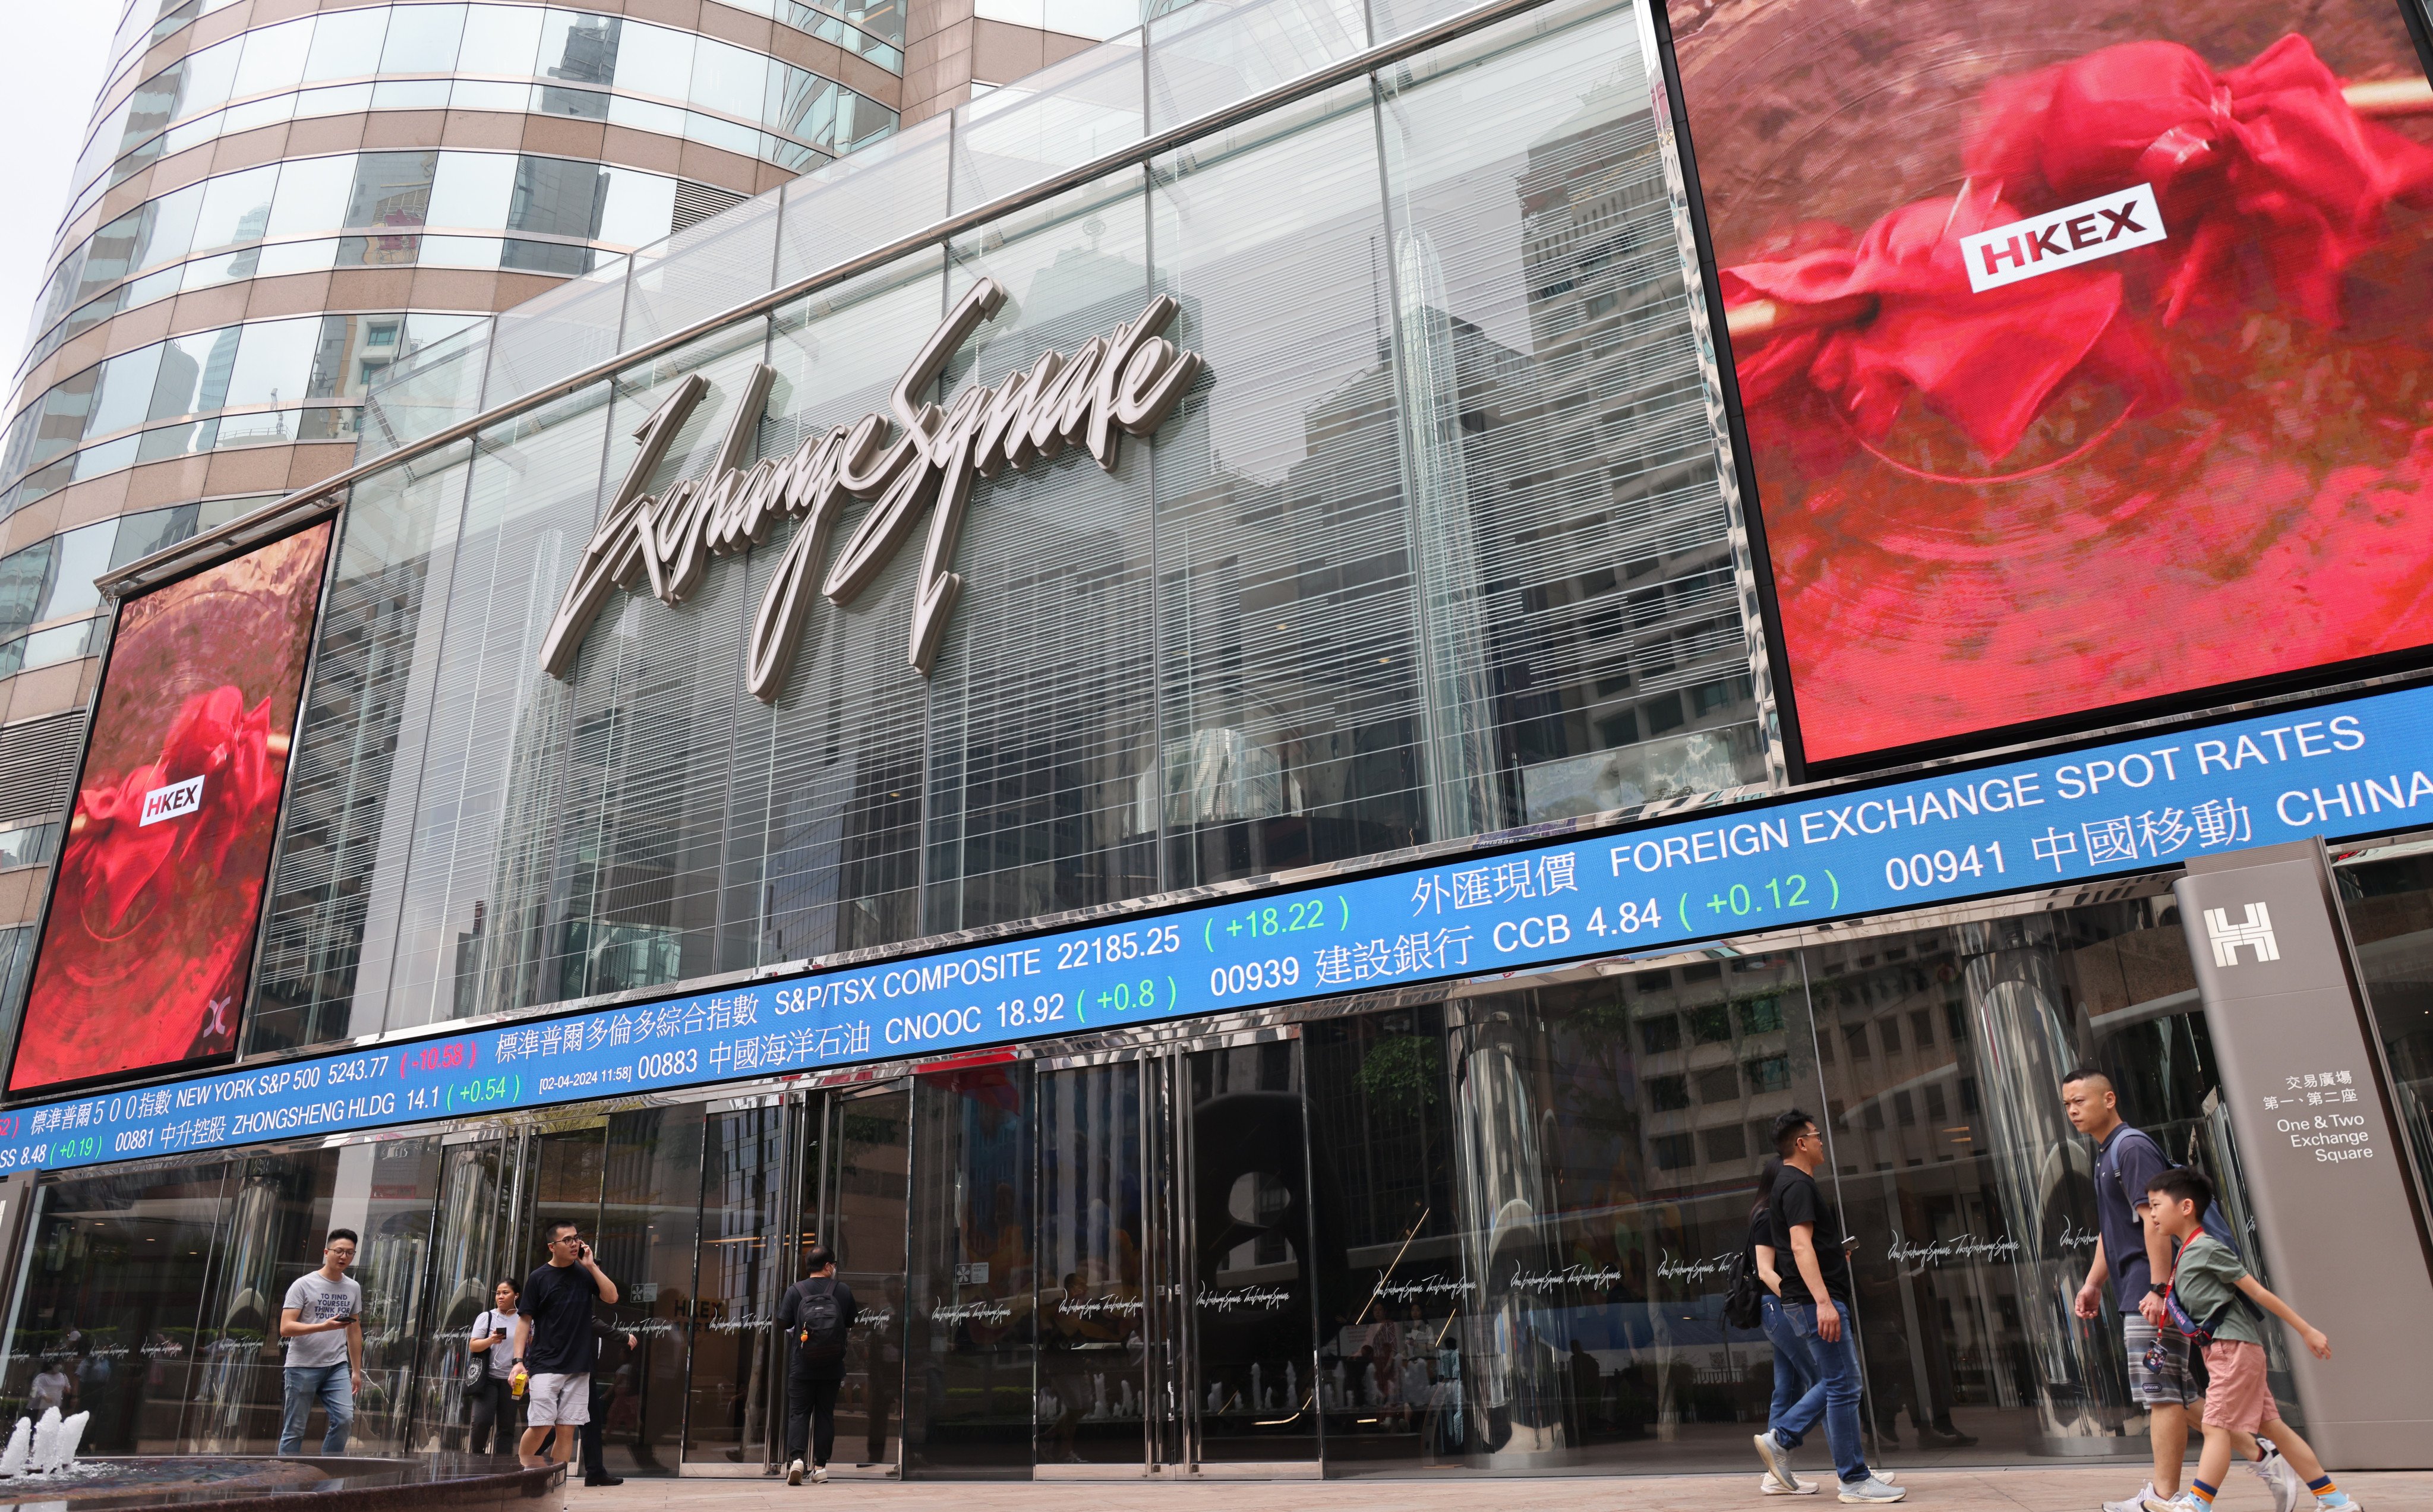 China’s regulators have announced a package of measures to boost liquidity in Hong Kong’s troubled stock market. Photo: Jelly Tse